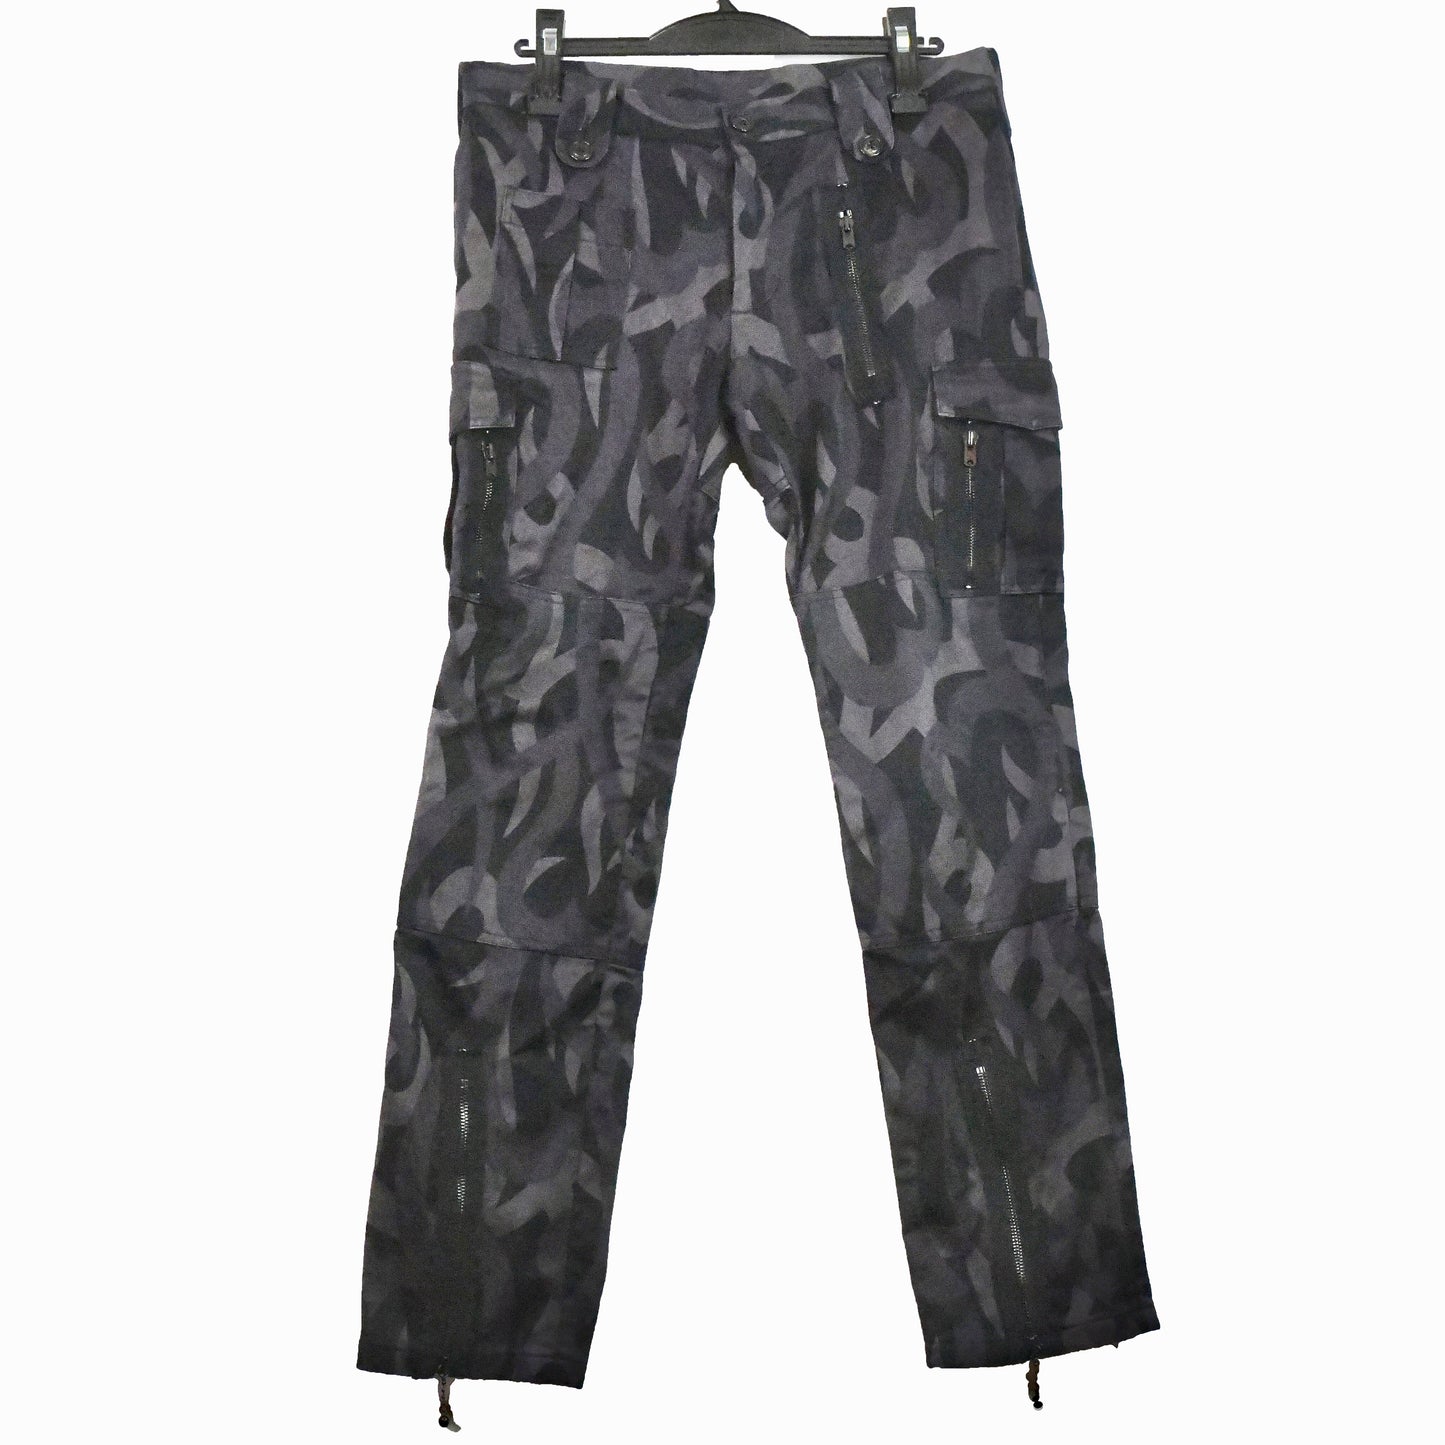 Number (N)ine heart camo Cargo flight pants S/S04 “Give Peace A Chance”3/30